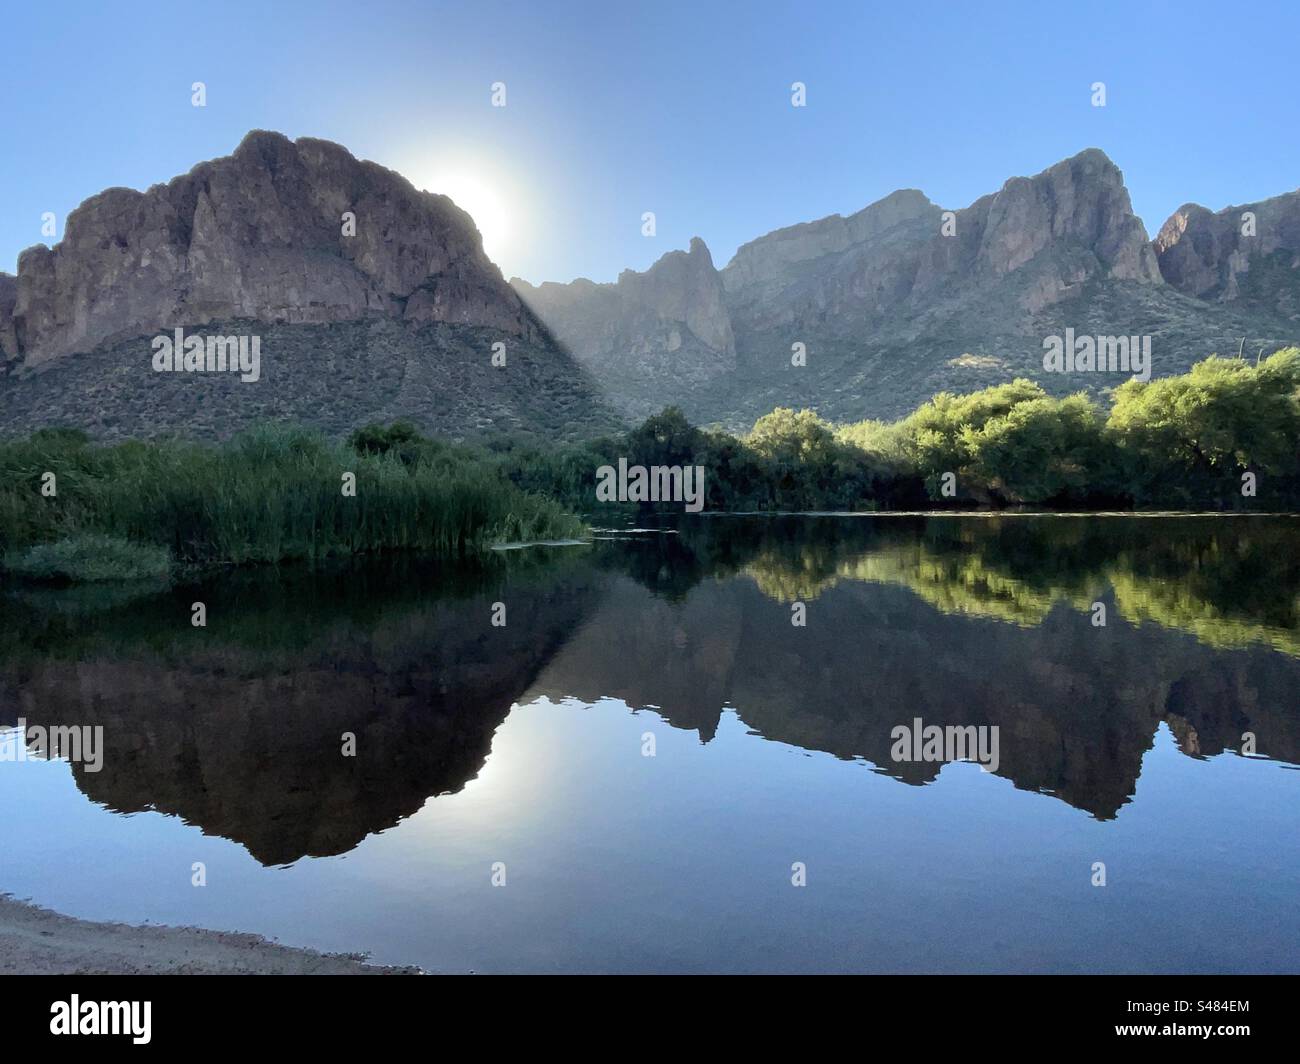 Salt River Reflections, Superstition Mountains, goldene Herbstfarben, strahlend blauer Himmel, Tonto National Forest, North Water Users Circle, Mesa, Arizona Stockfoto